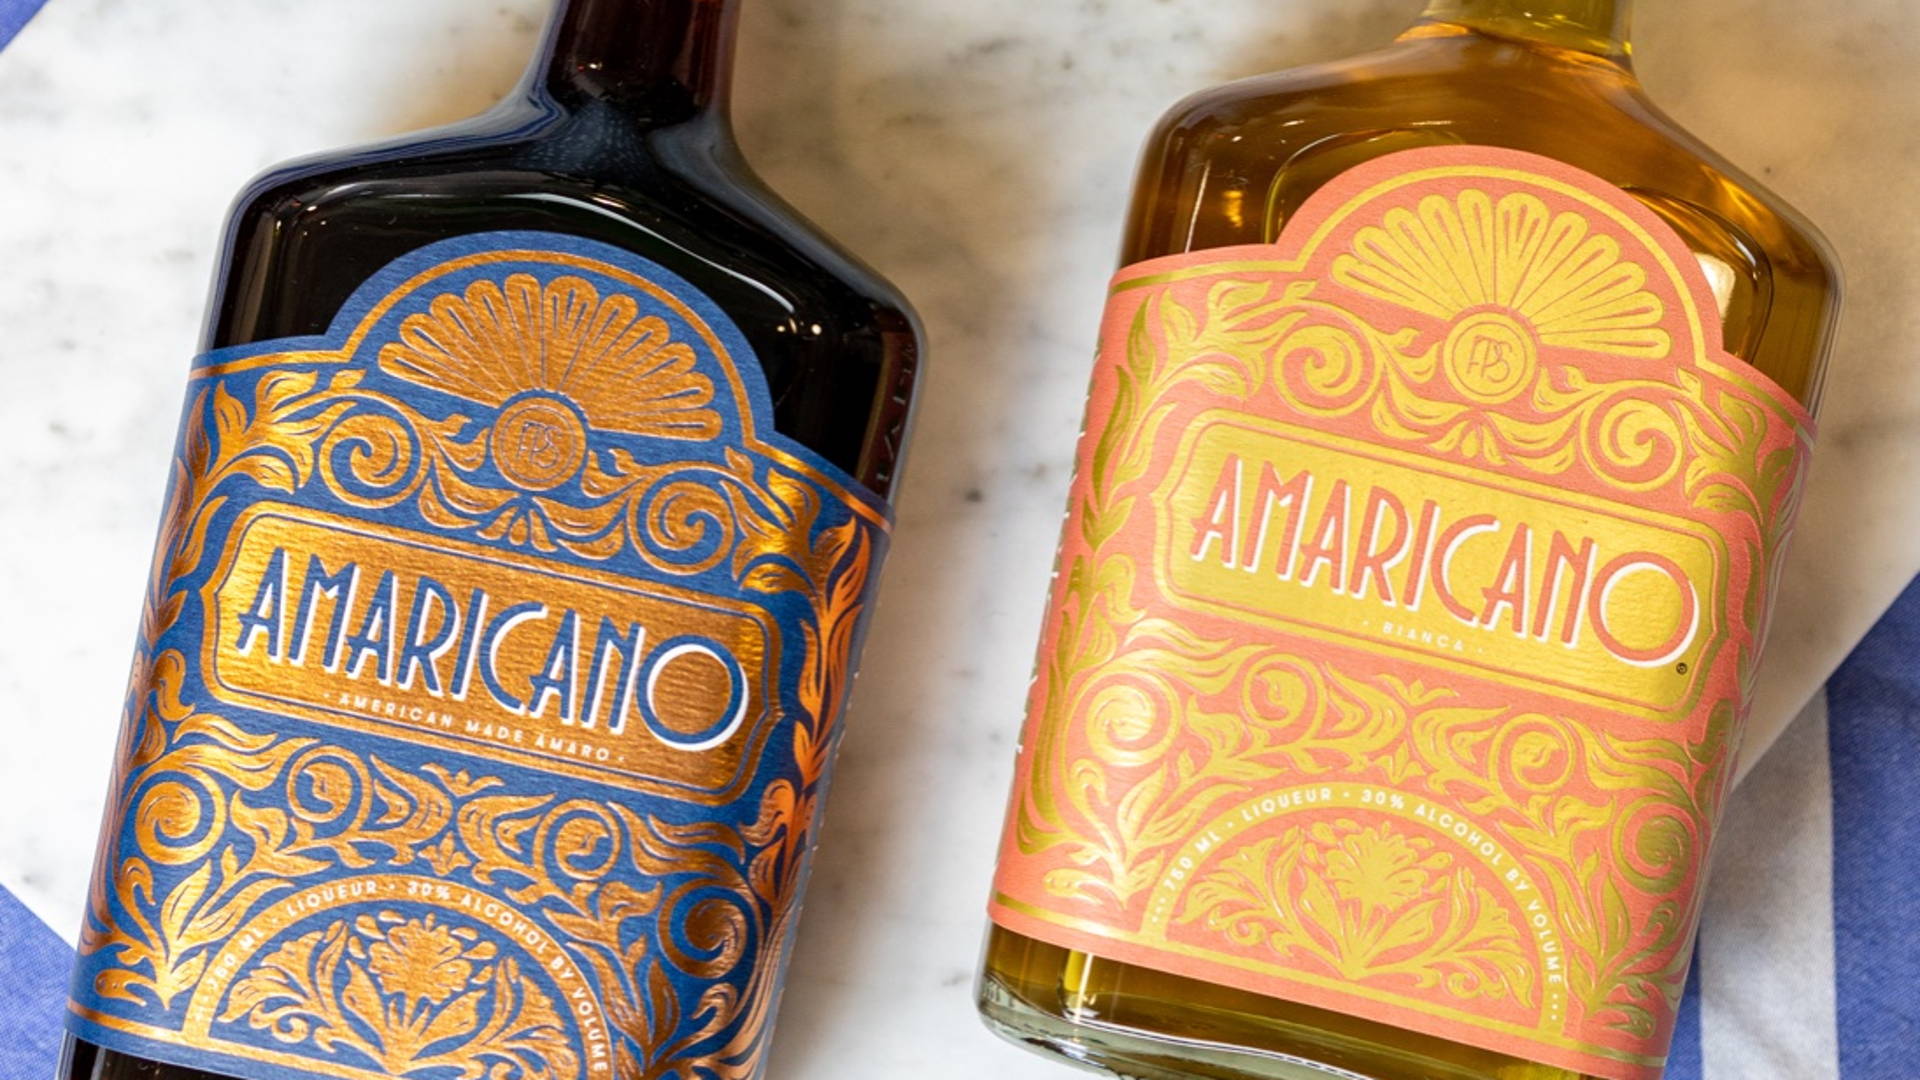 Featured image for Fast Penny Spirits' Staggering Italian-Inspired Label Design